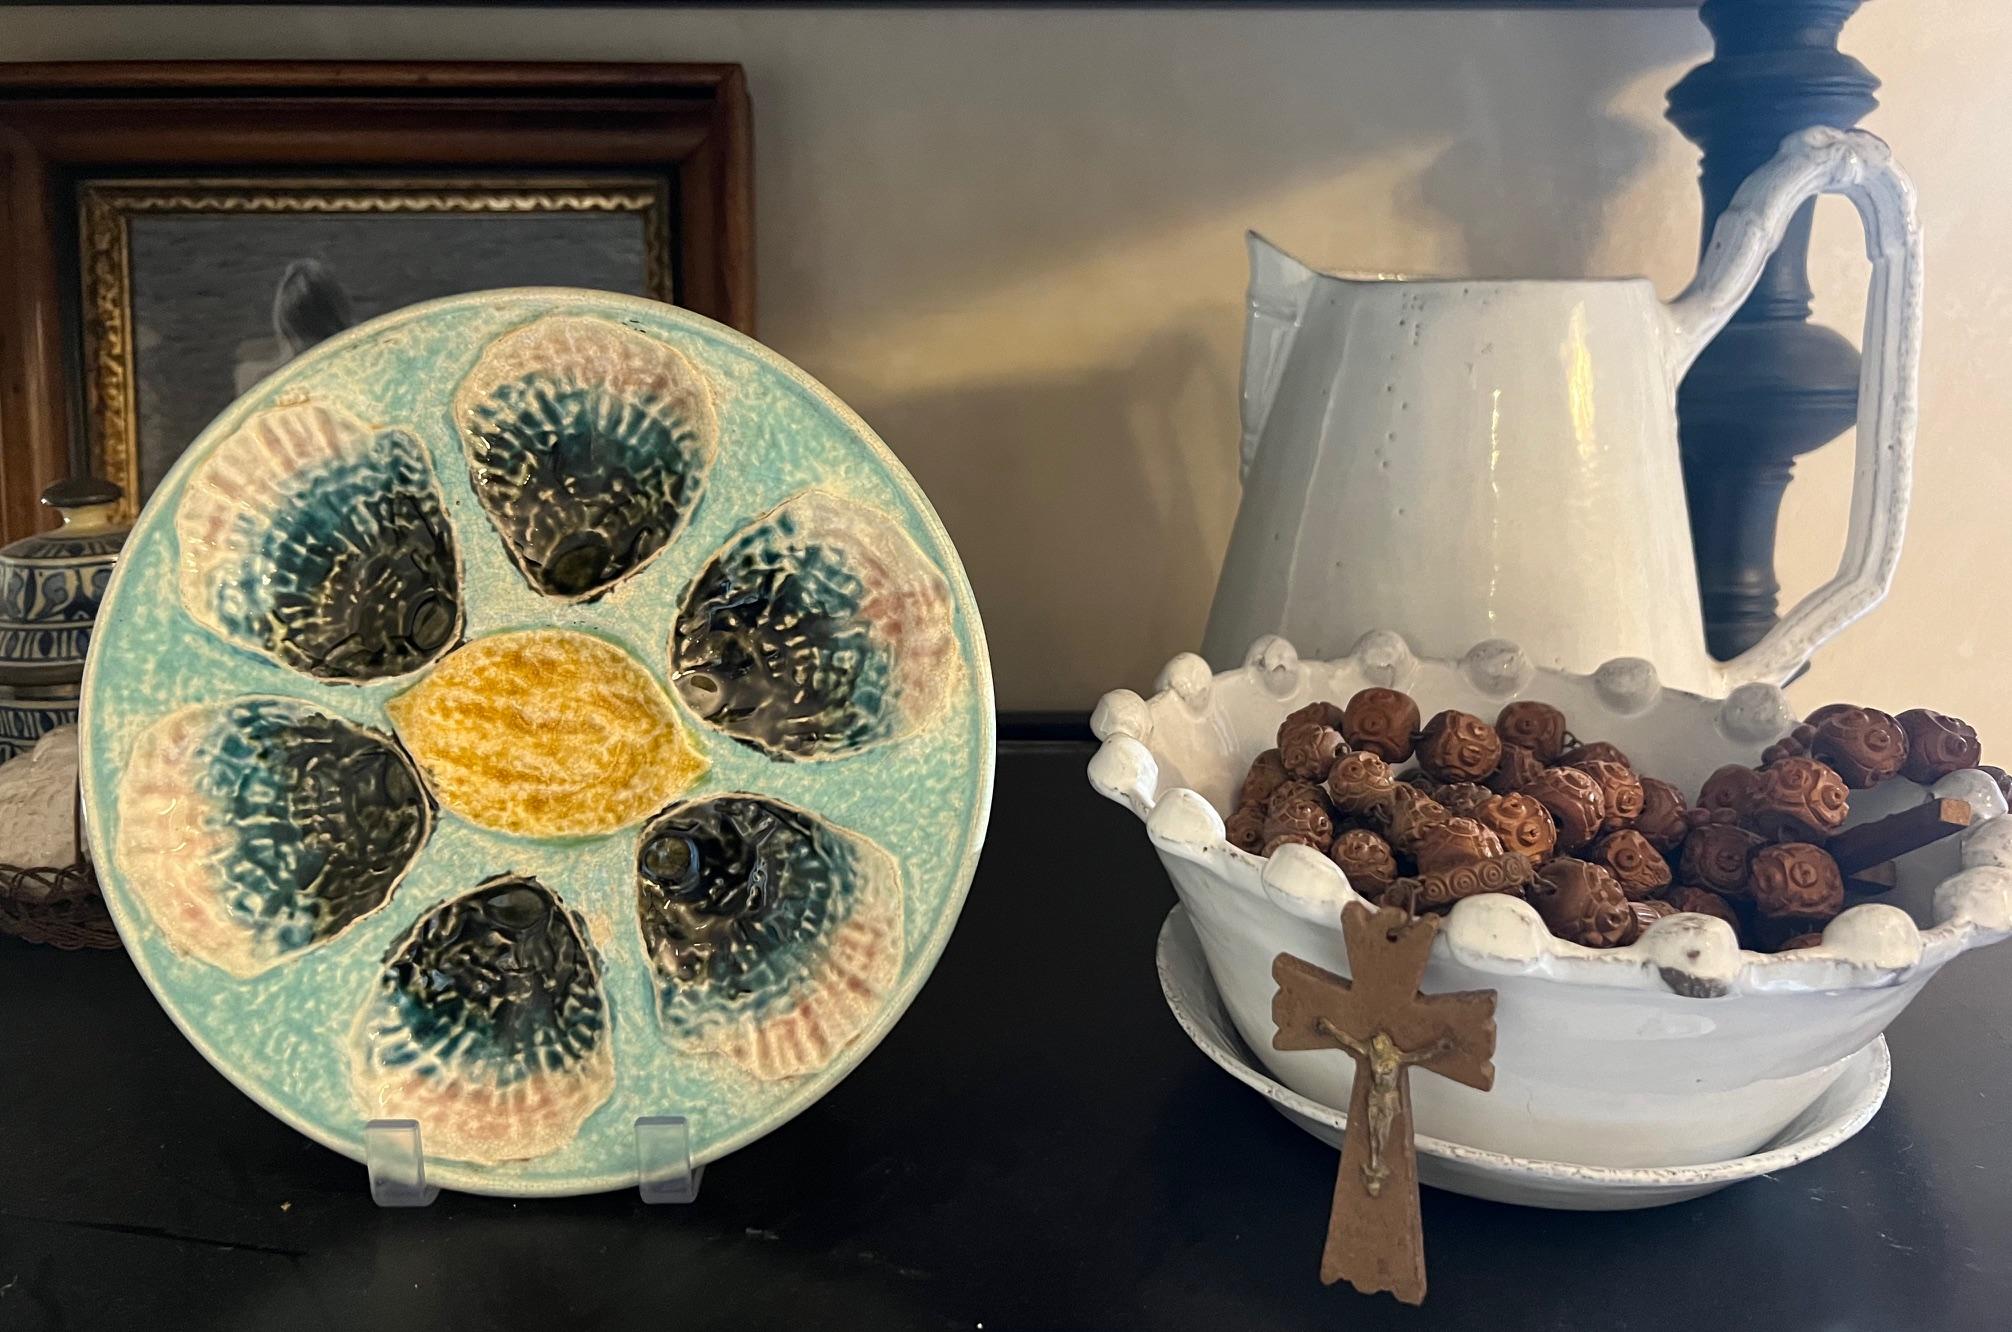 Antique French majolica six well oyster plate made by Salins in the 1880's. The shell forms are on a baby blue background with a yellow center well for lemons, in the shape of a lemon.